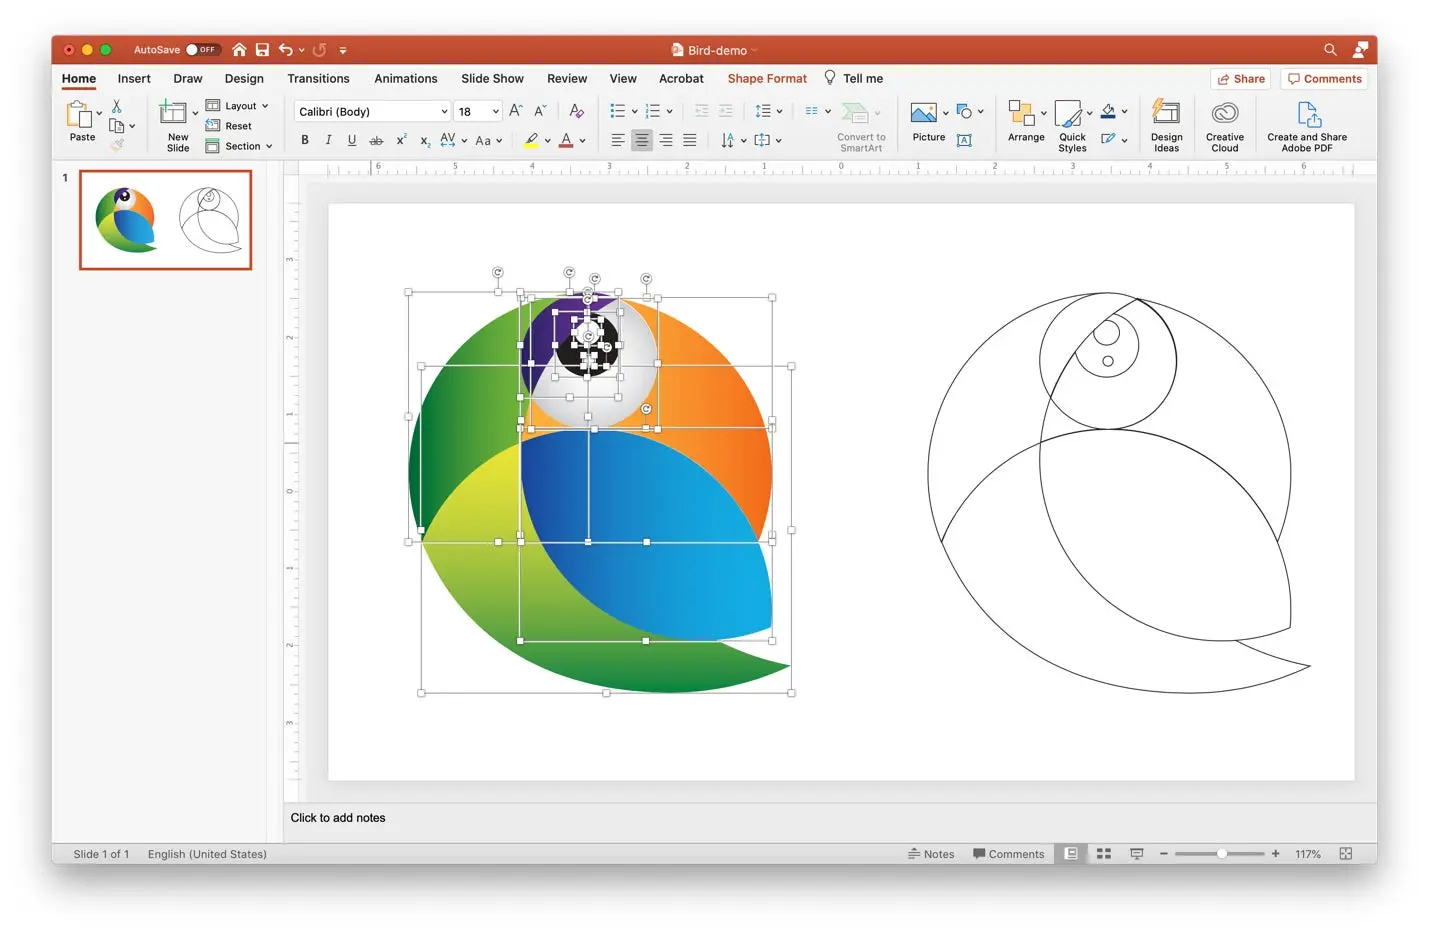 Notice how the Illustrator artboard vector elements are accurately replicated in PowerPoint with all vector elements being editable.